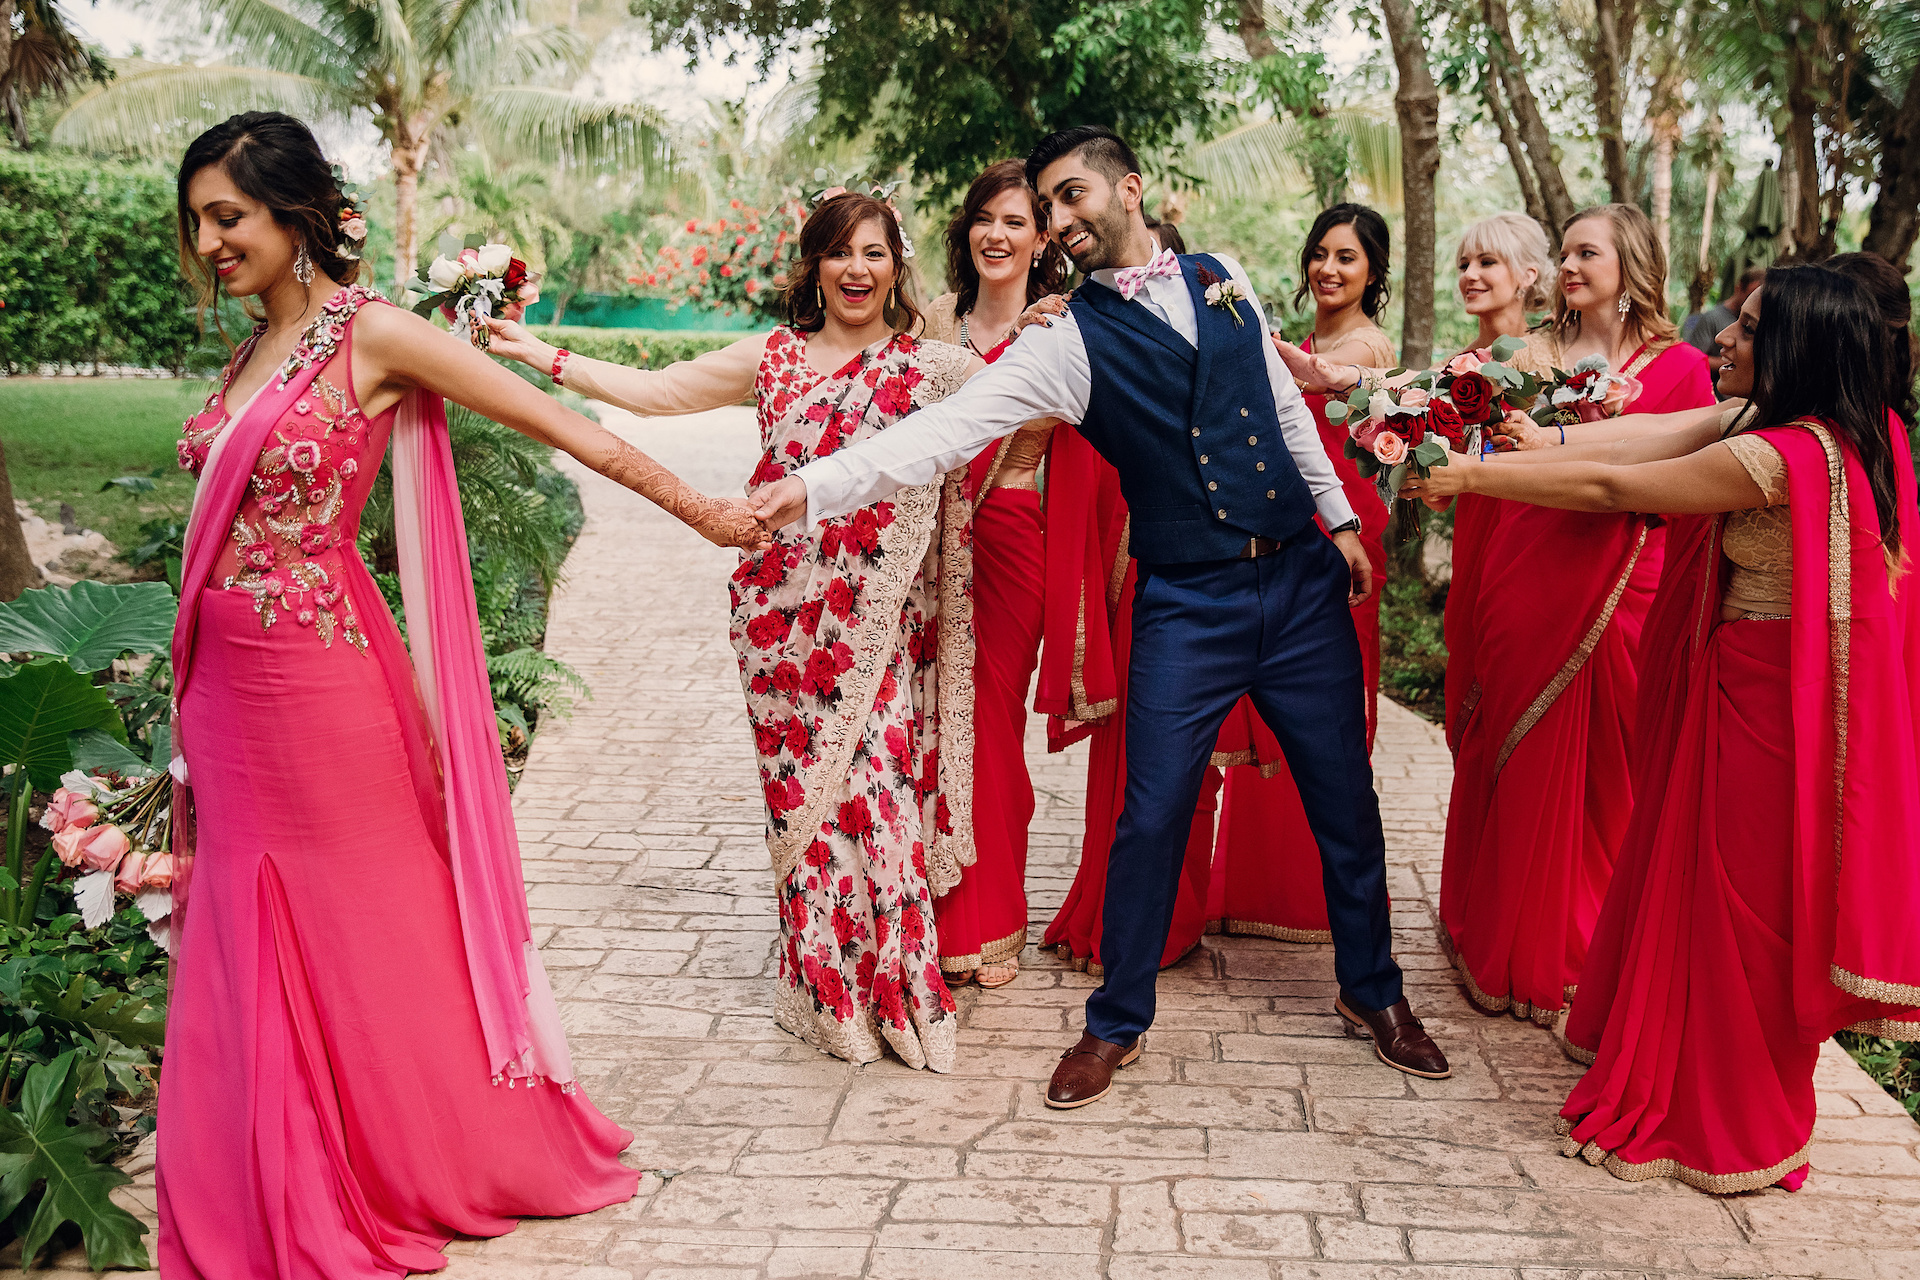 Funny scenes with bridesmaids trying to keep Hindu bride away from groom